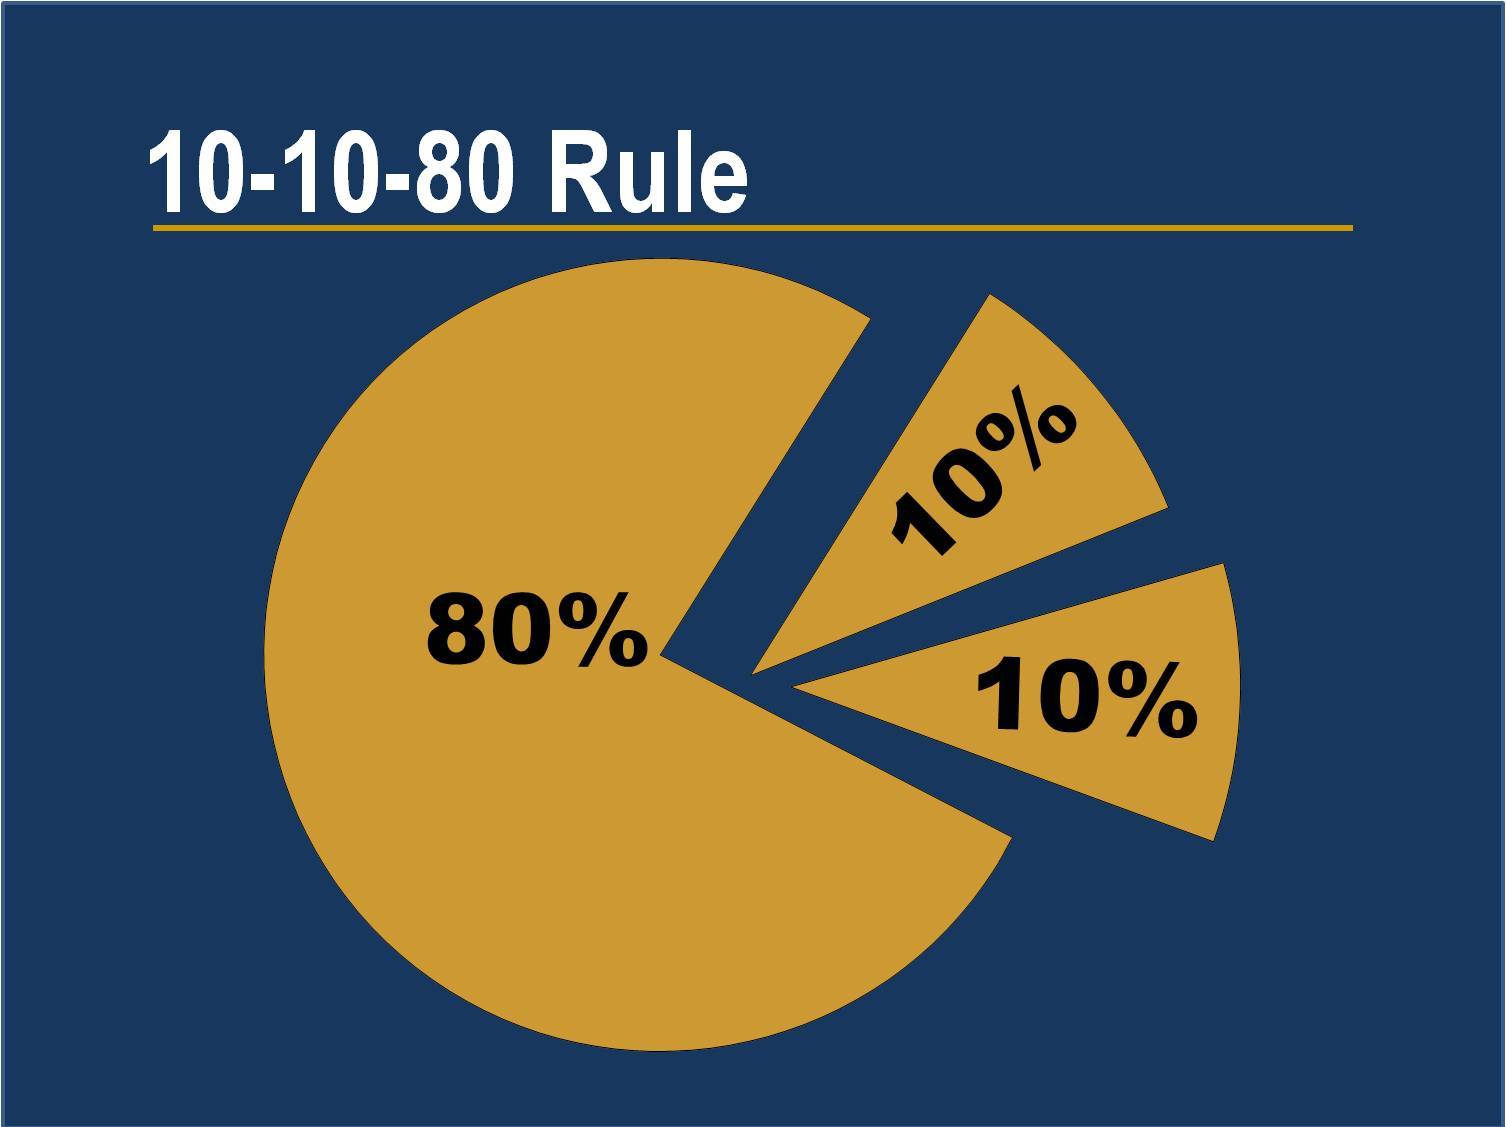 The 80:10:10 Rules of Direct Selling: Listen, Connect, and Succeed